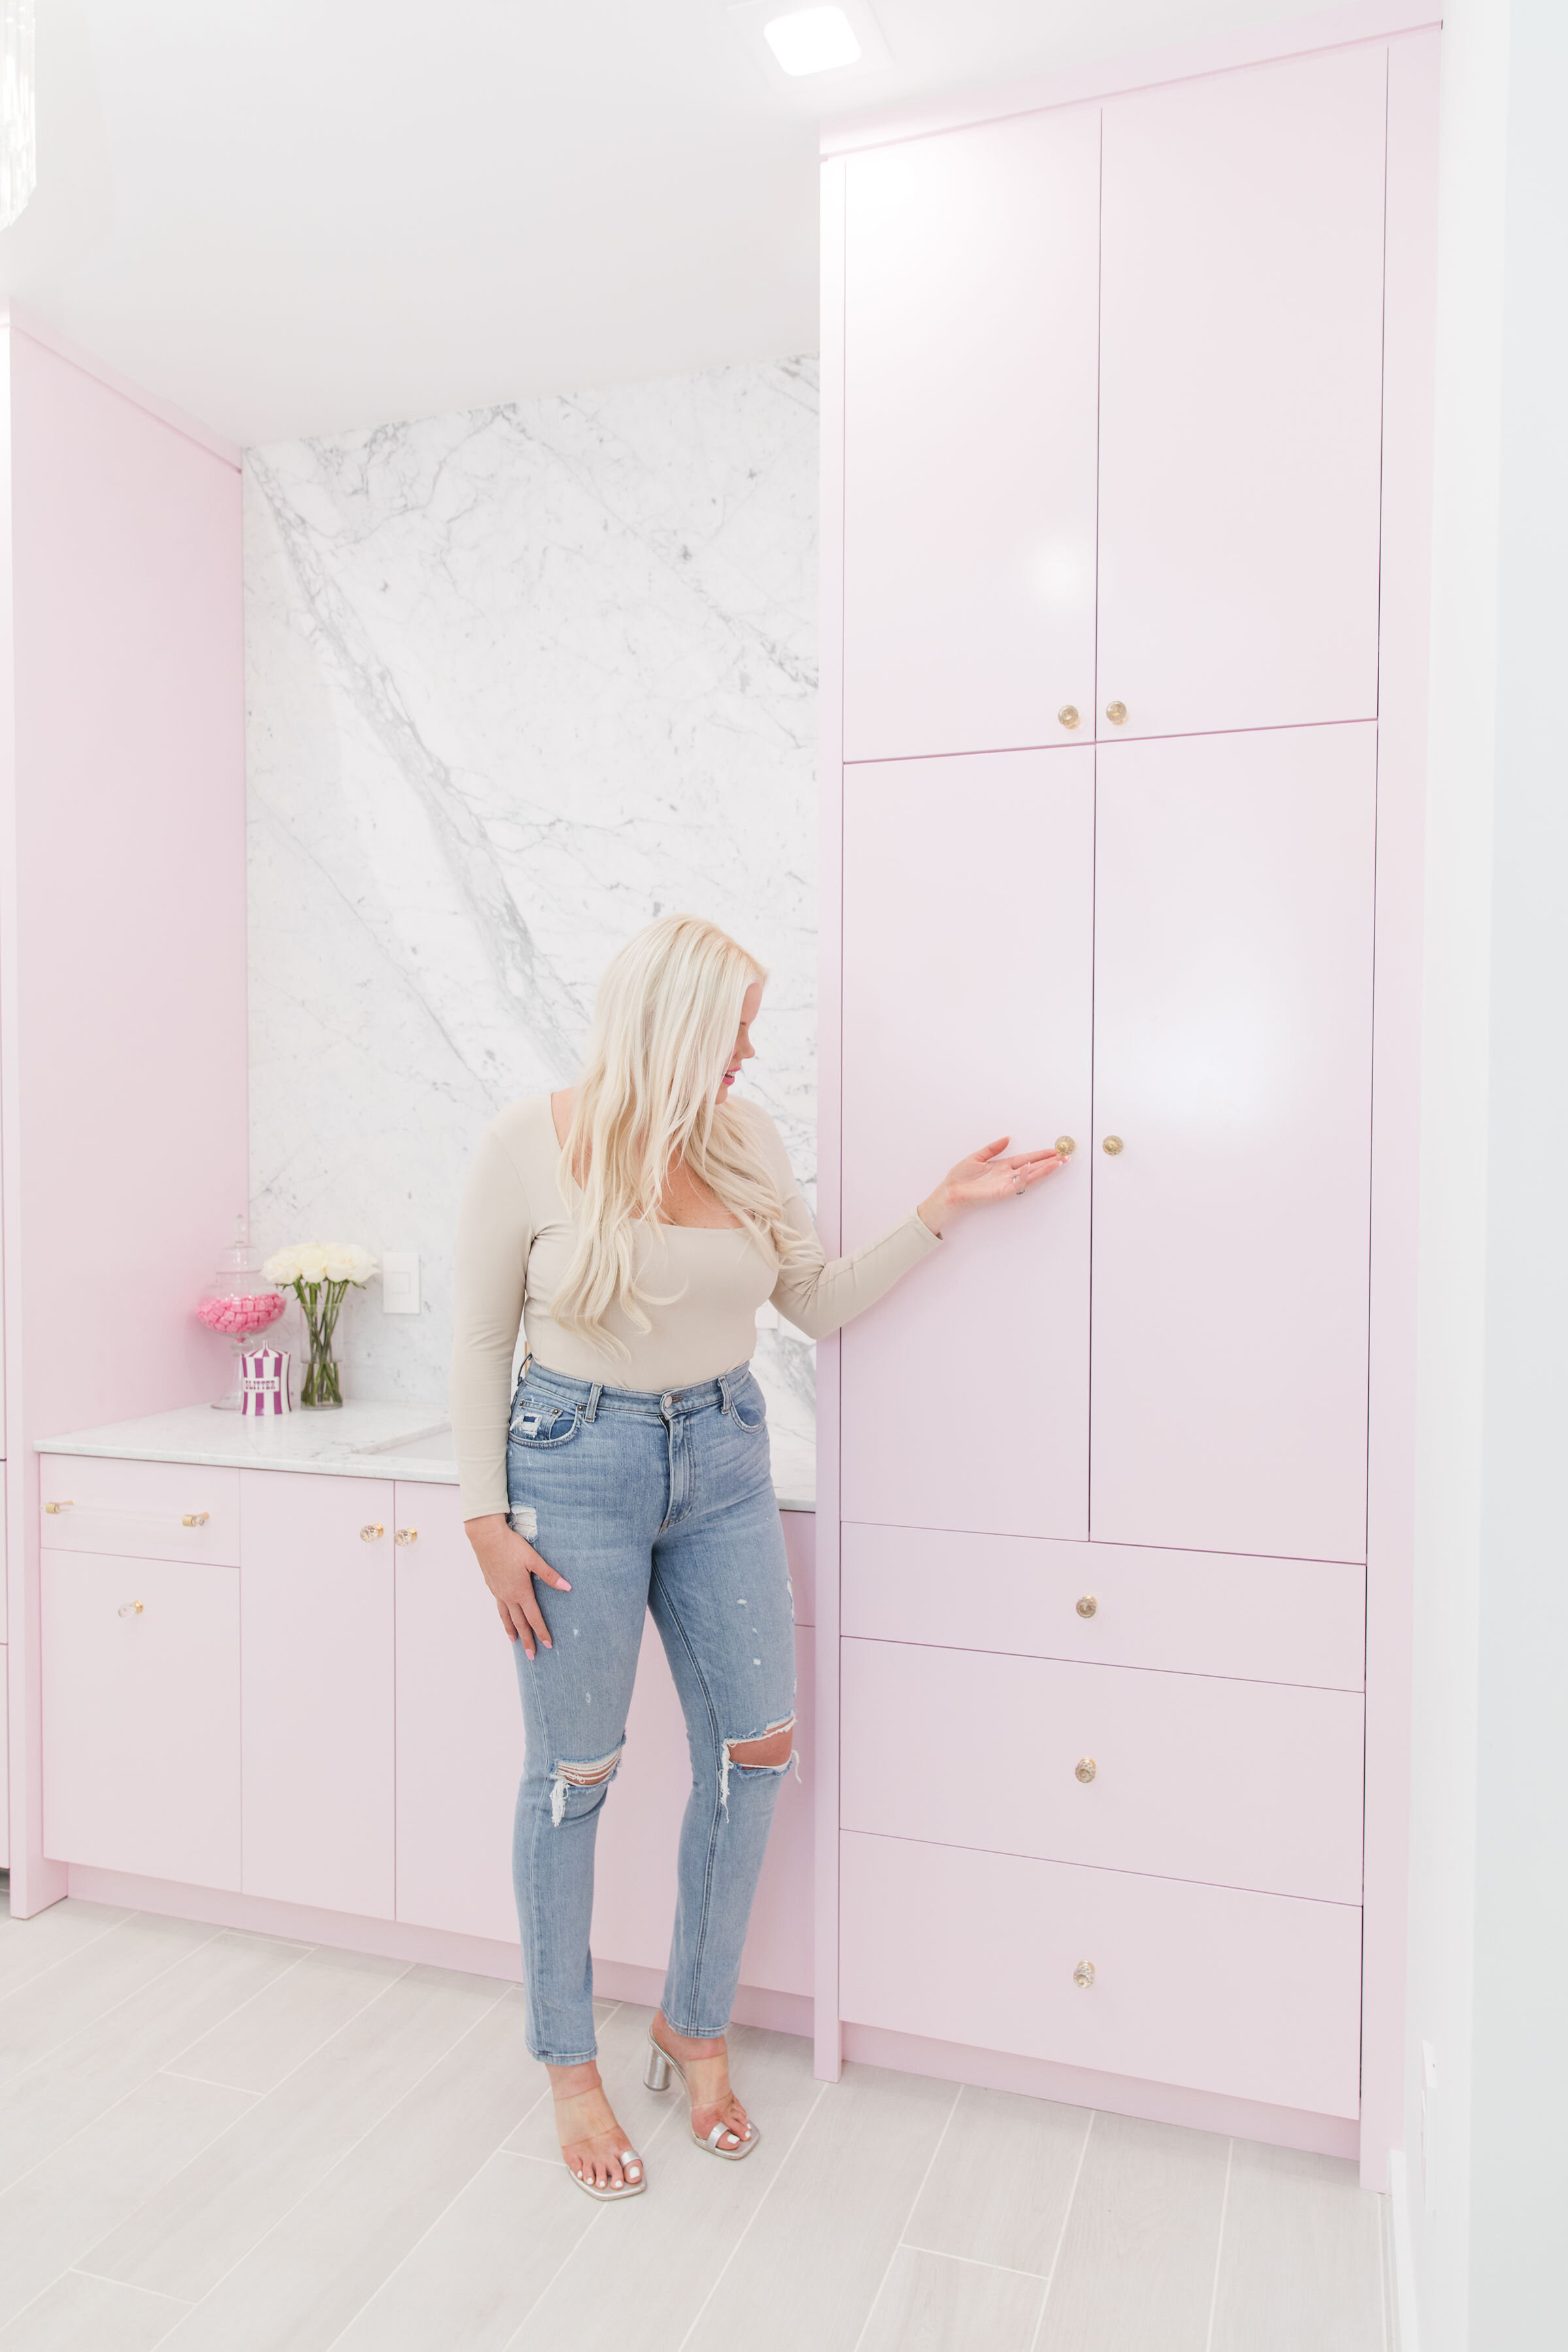 POSH-PR-The-Caroline-Doll-Barbie-Office-Pink-Style-Boss-Goals-At-Home-Workspace-Luxury-Fashion-Infused-Office-The-Doll-HQ-Chic-Agency-Custom-Dream-Kitchen-4.jpg